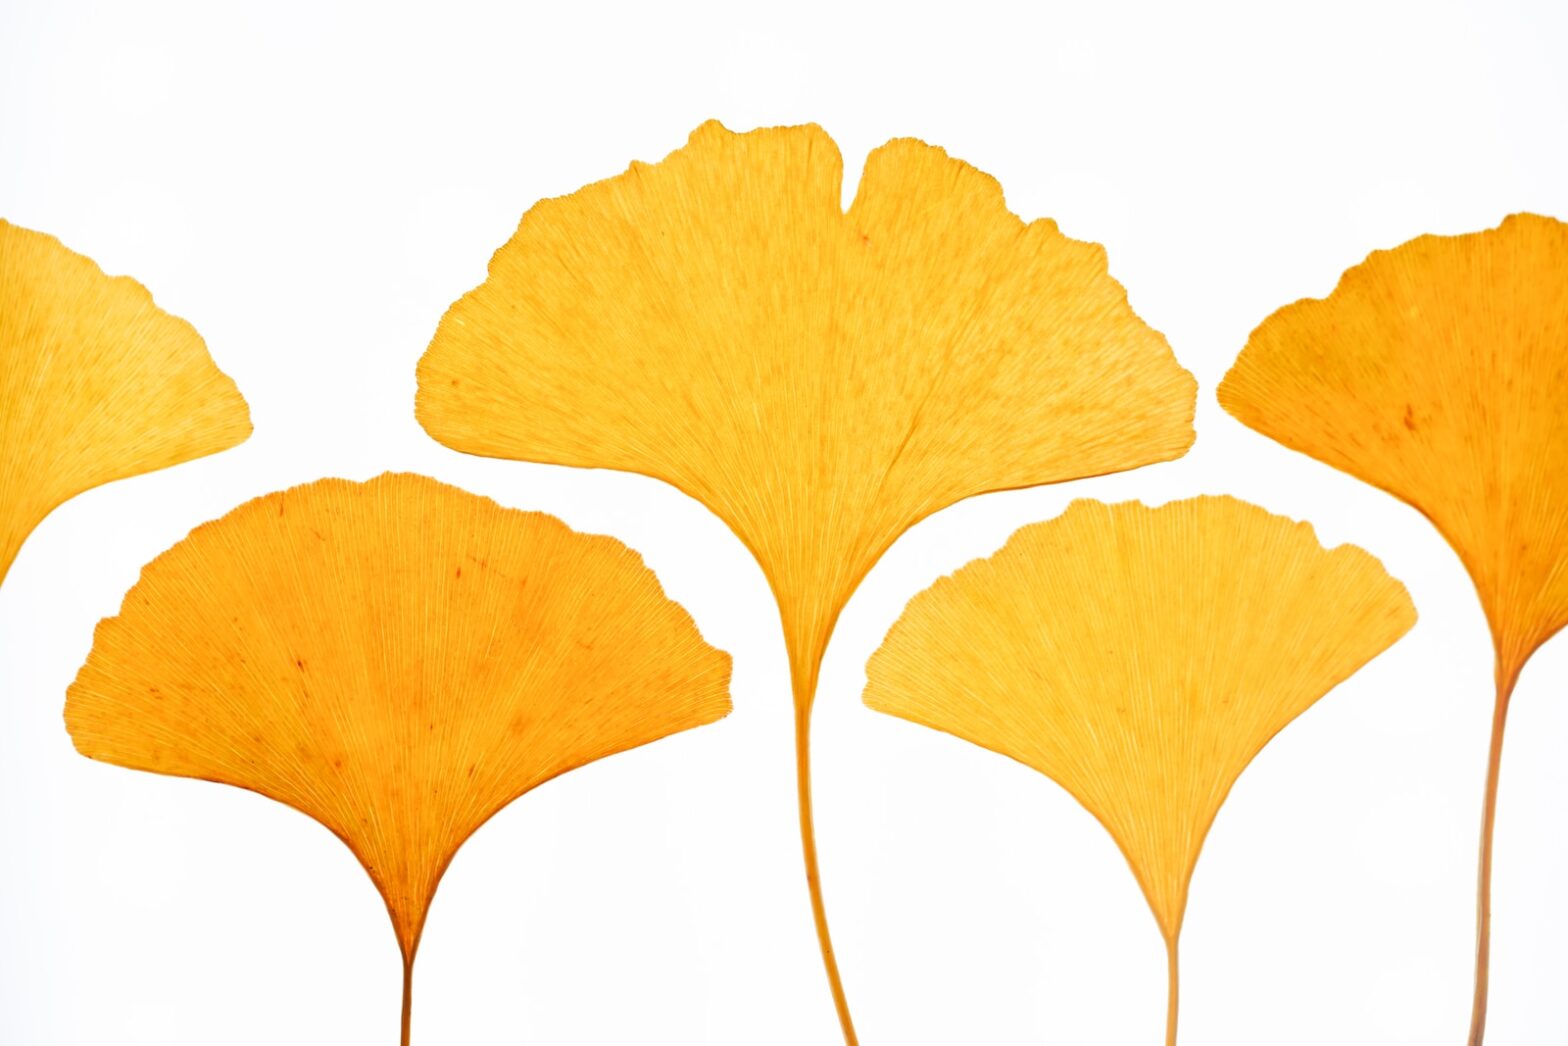 a group of yellow ginkgo biloba leaves on a white background. ADHD natural supplements for adults.